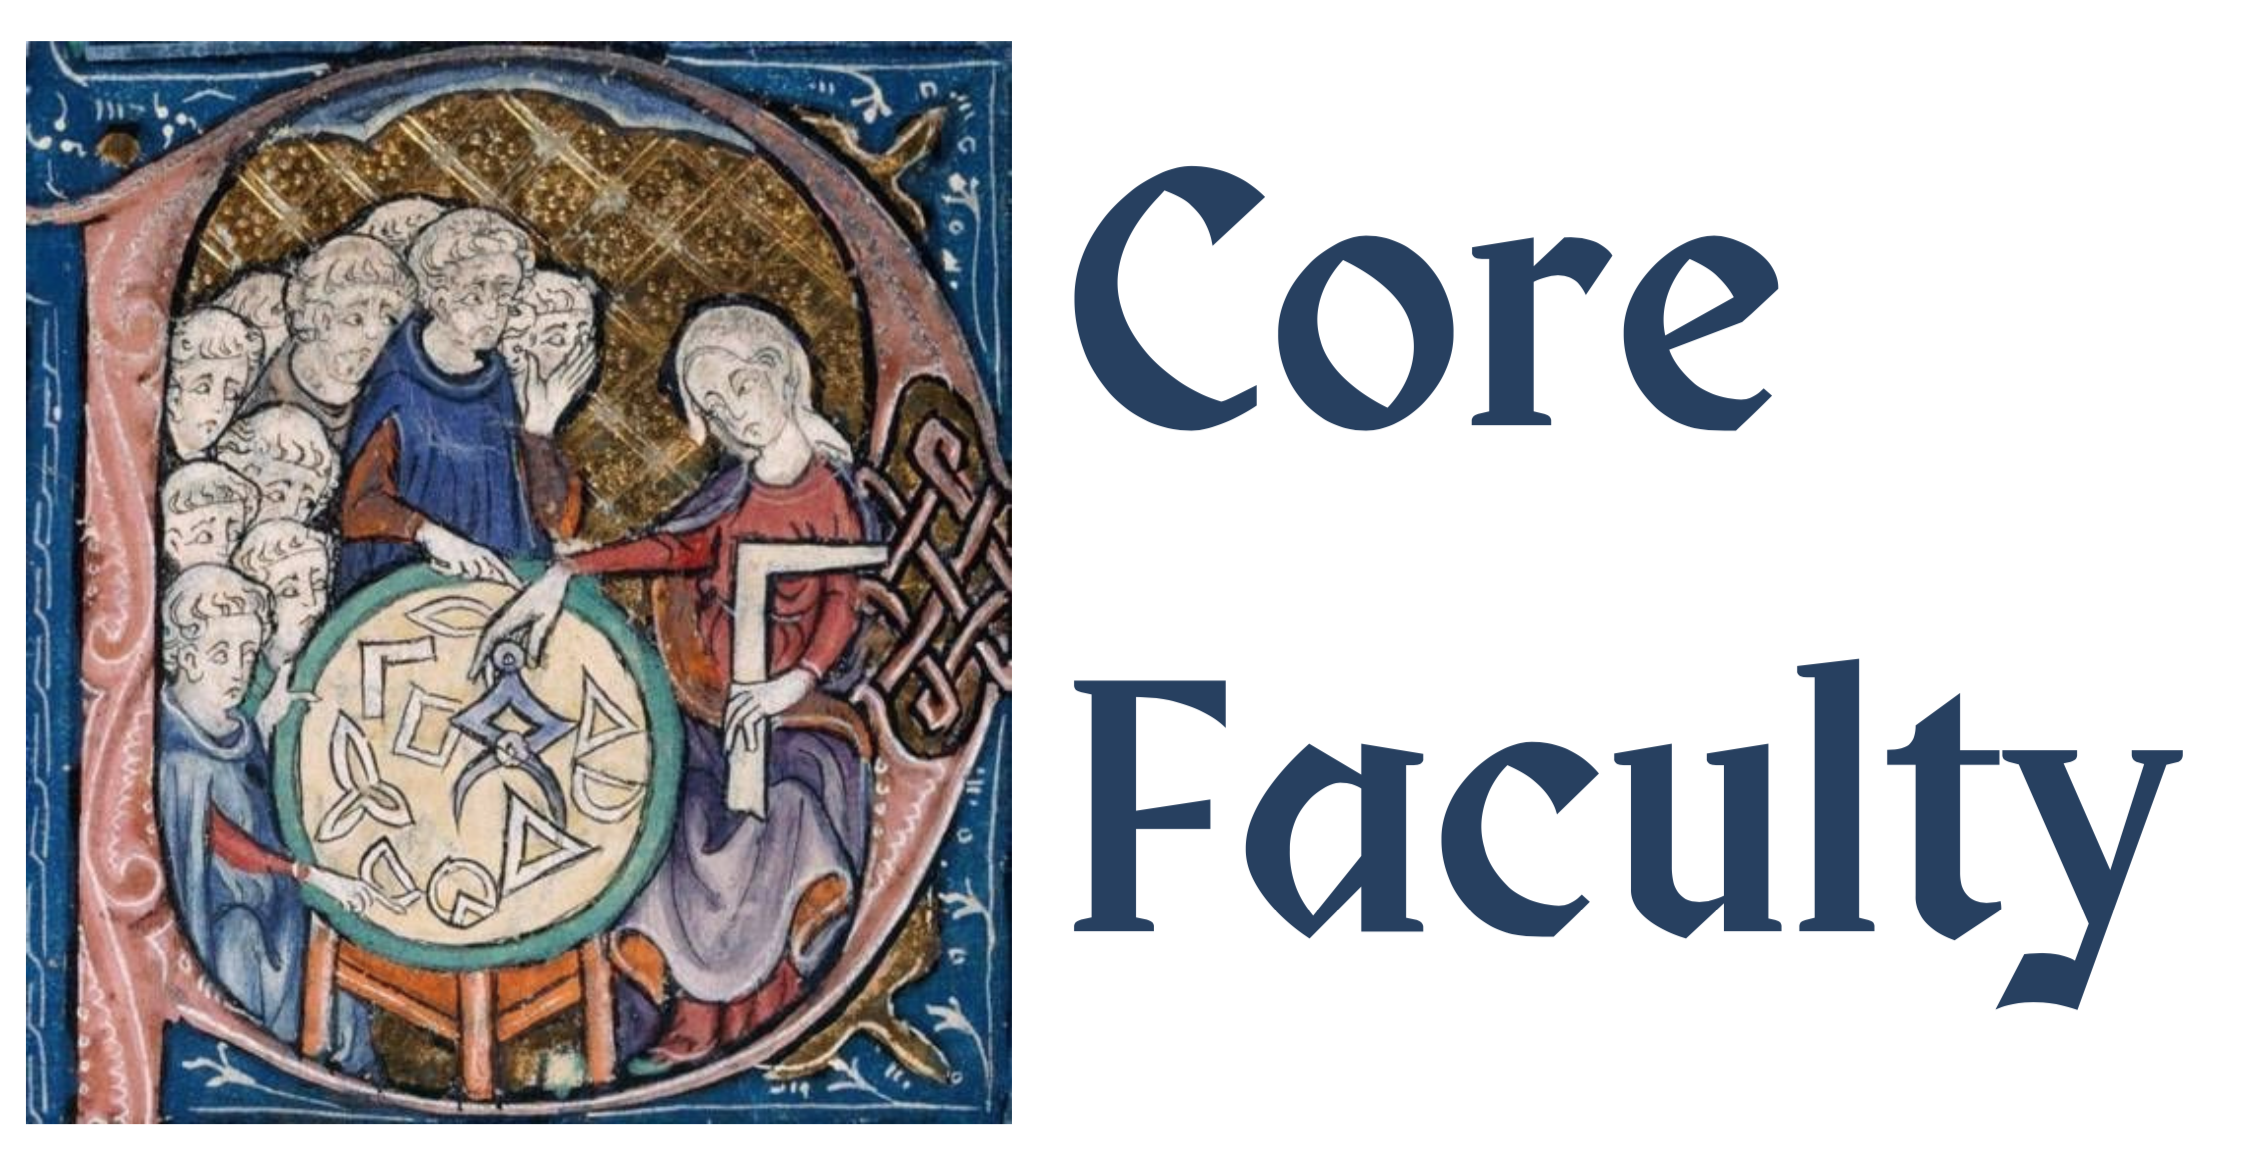 Core Faculty - Graphic Image